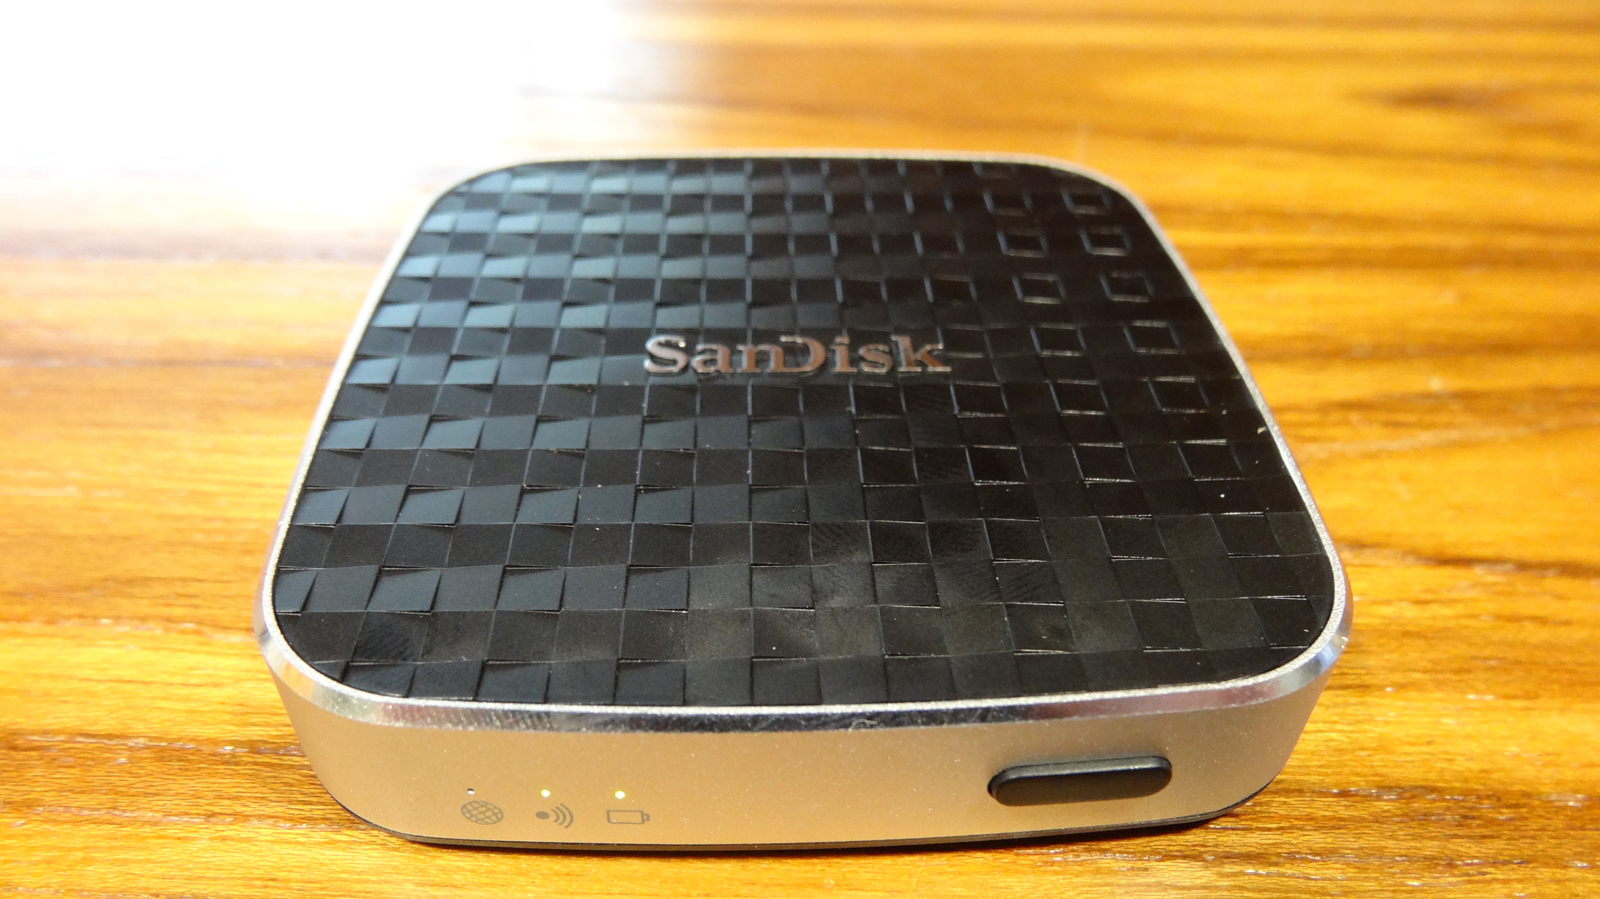 SanDisk Connect: Share And Stream Your Mobile Media Anywhere (For Less)